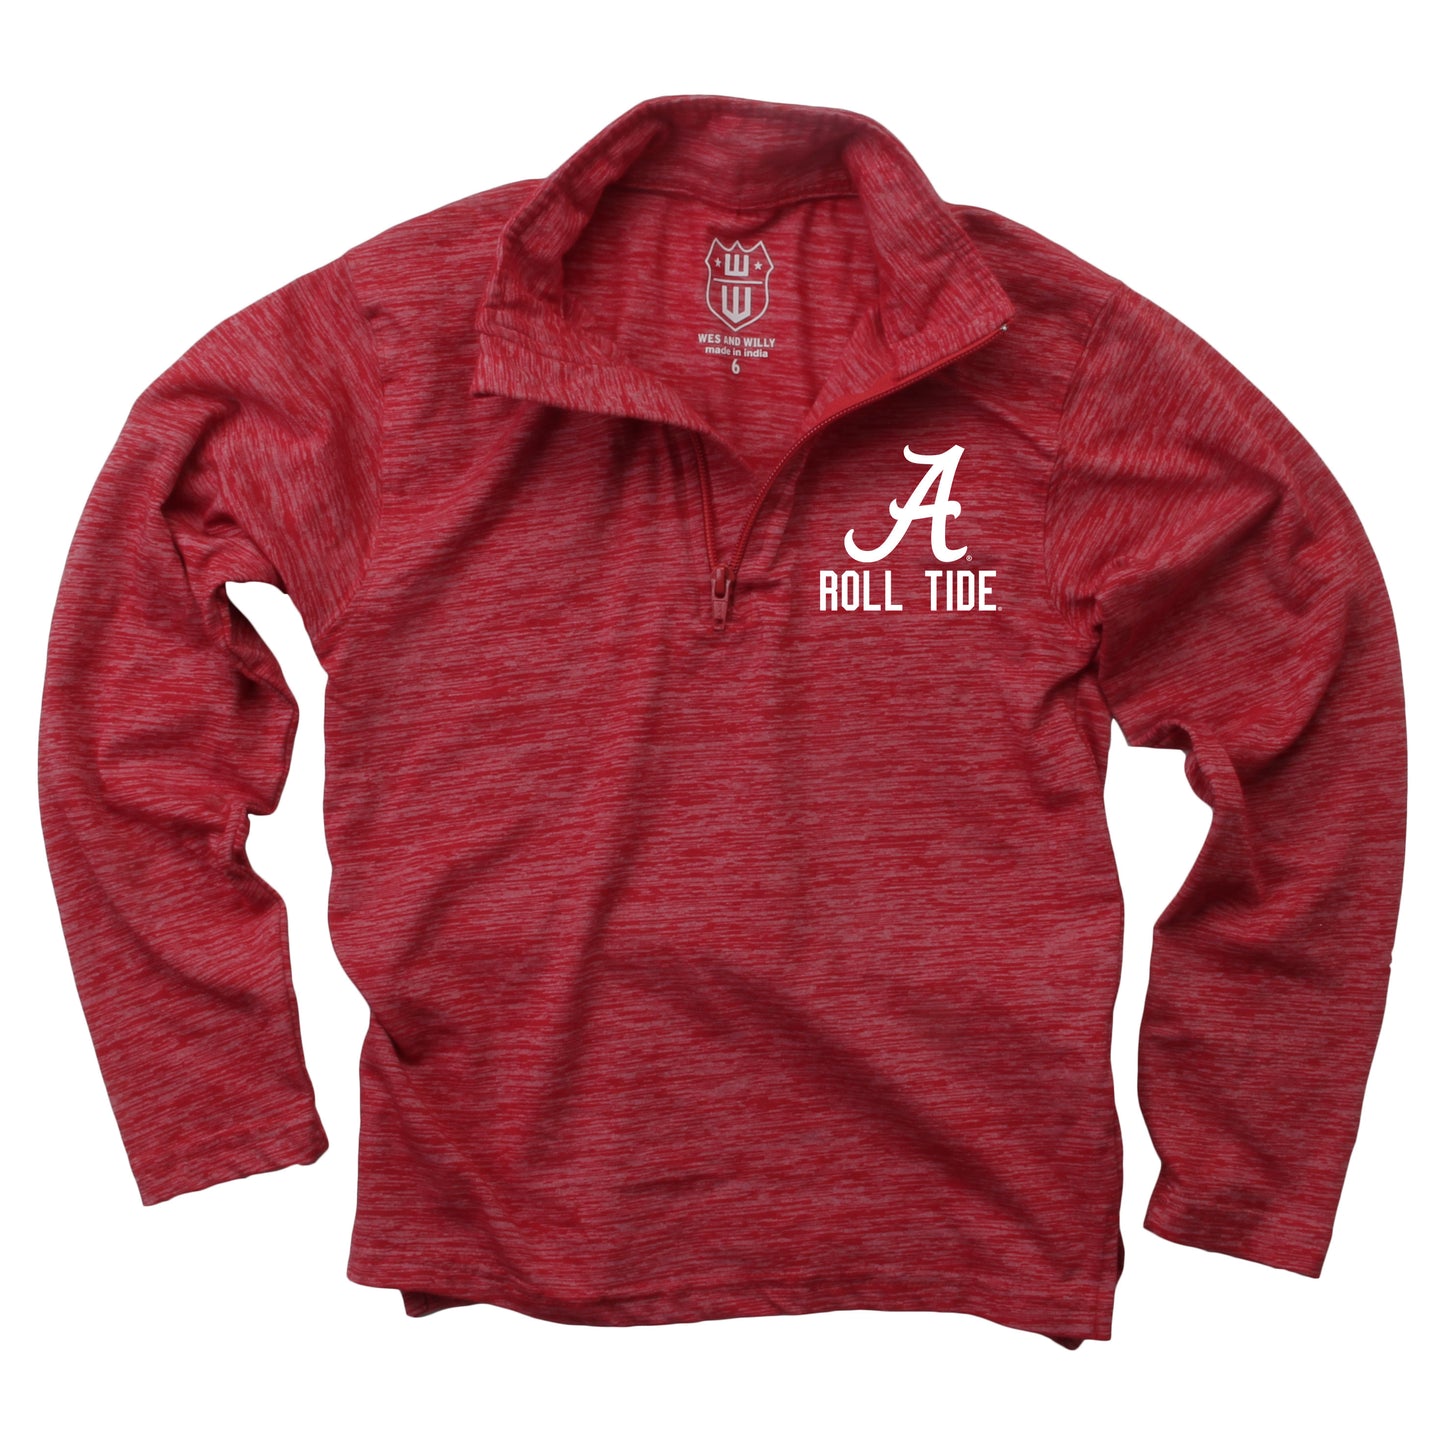 Alabama Crimson Tide Wes and Willy Youth Boys Cloudy Yarn Long Sleeve College Quarter Zip